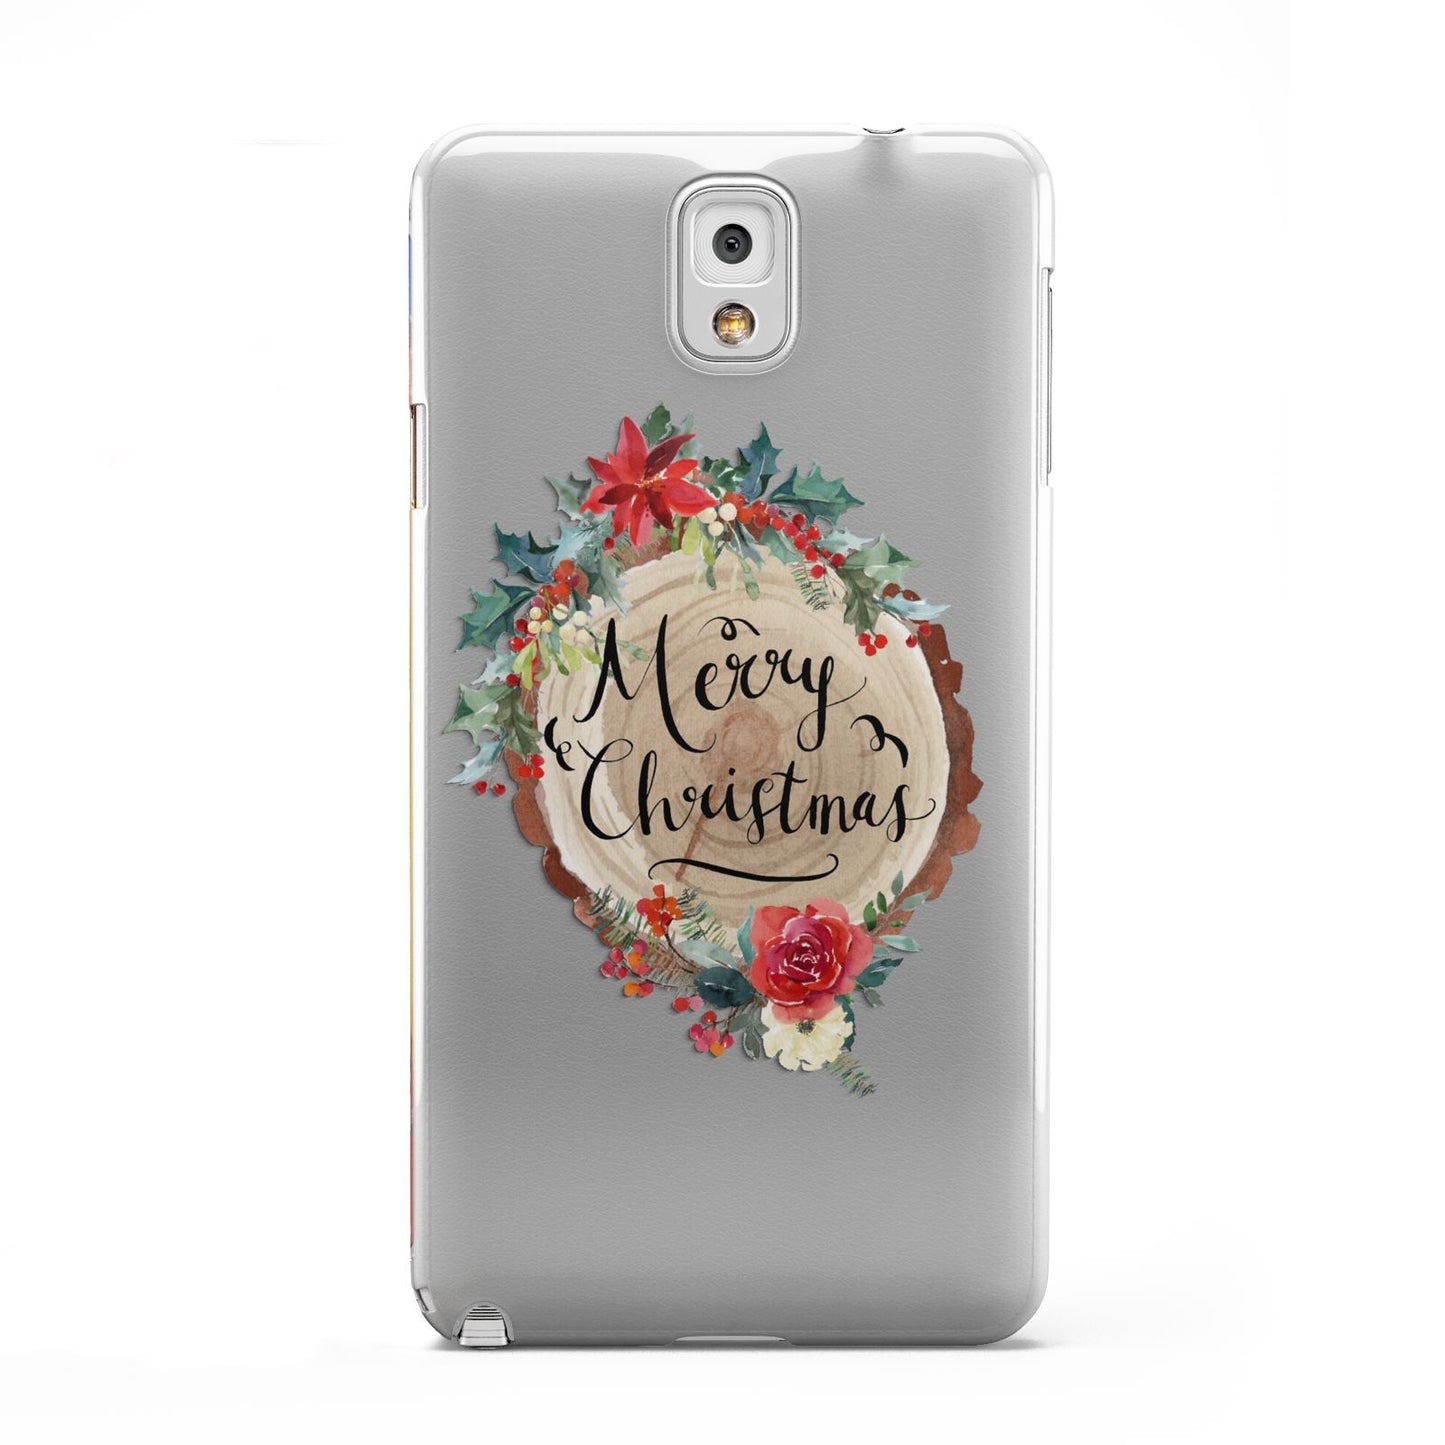 Merry Christmas Log Floral Samsung Galaxy Note 3 Case